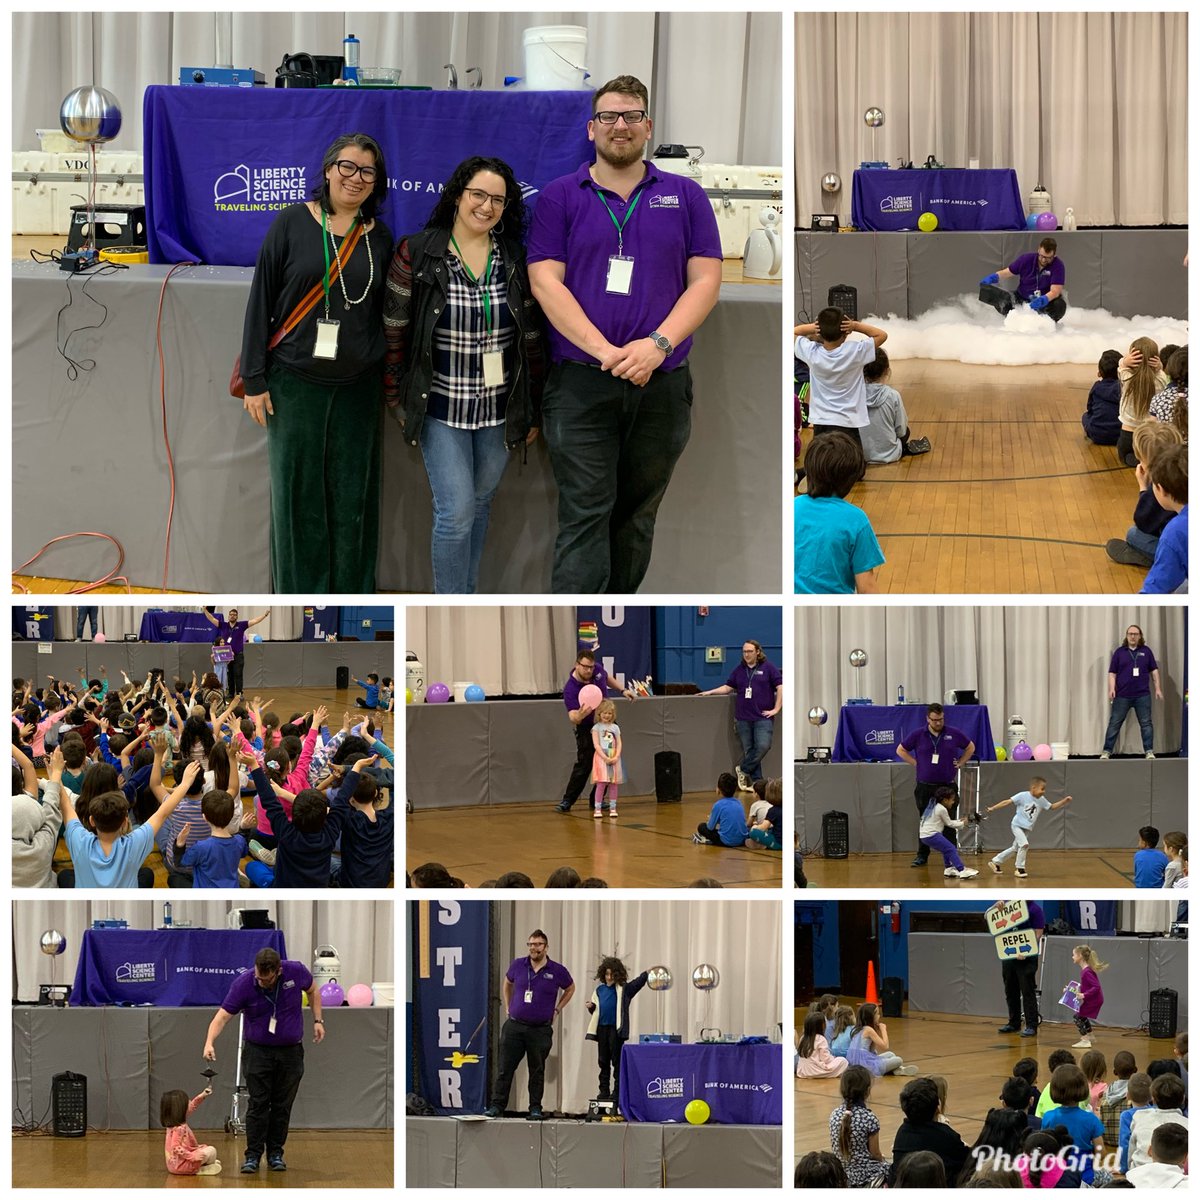 #WeeLoveScience!! Thank you to the DWS PTA for sponsoring an amazing school assembly today from the Liberty Science Center!! 🔬📚⚗️💖 ⁦@WeehawkenTSD⁩ ⁦@DWS_PTA⁩ ⁦@EricCrespoEDU⁩ ⁦@FAmato53⁩ ⁦@al_orecchio⁩